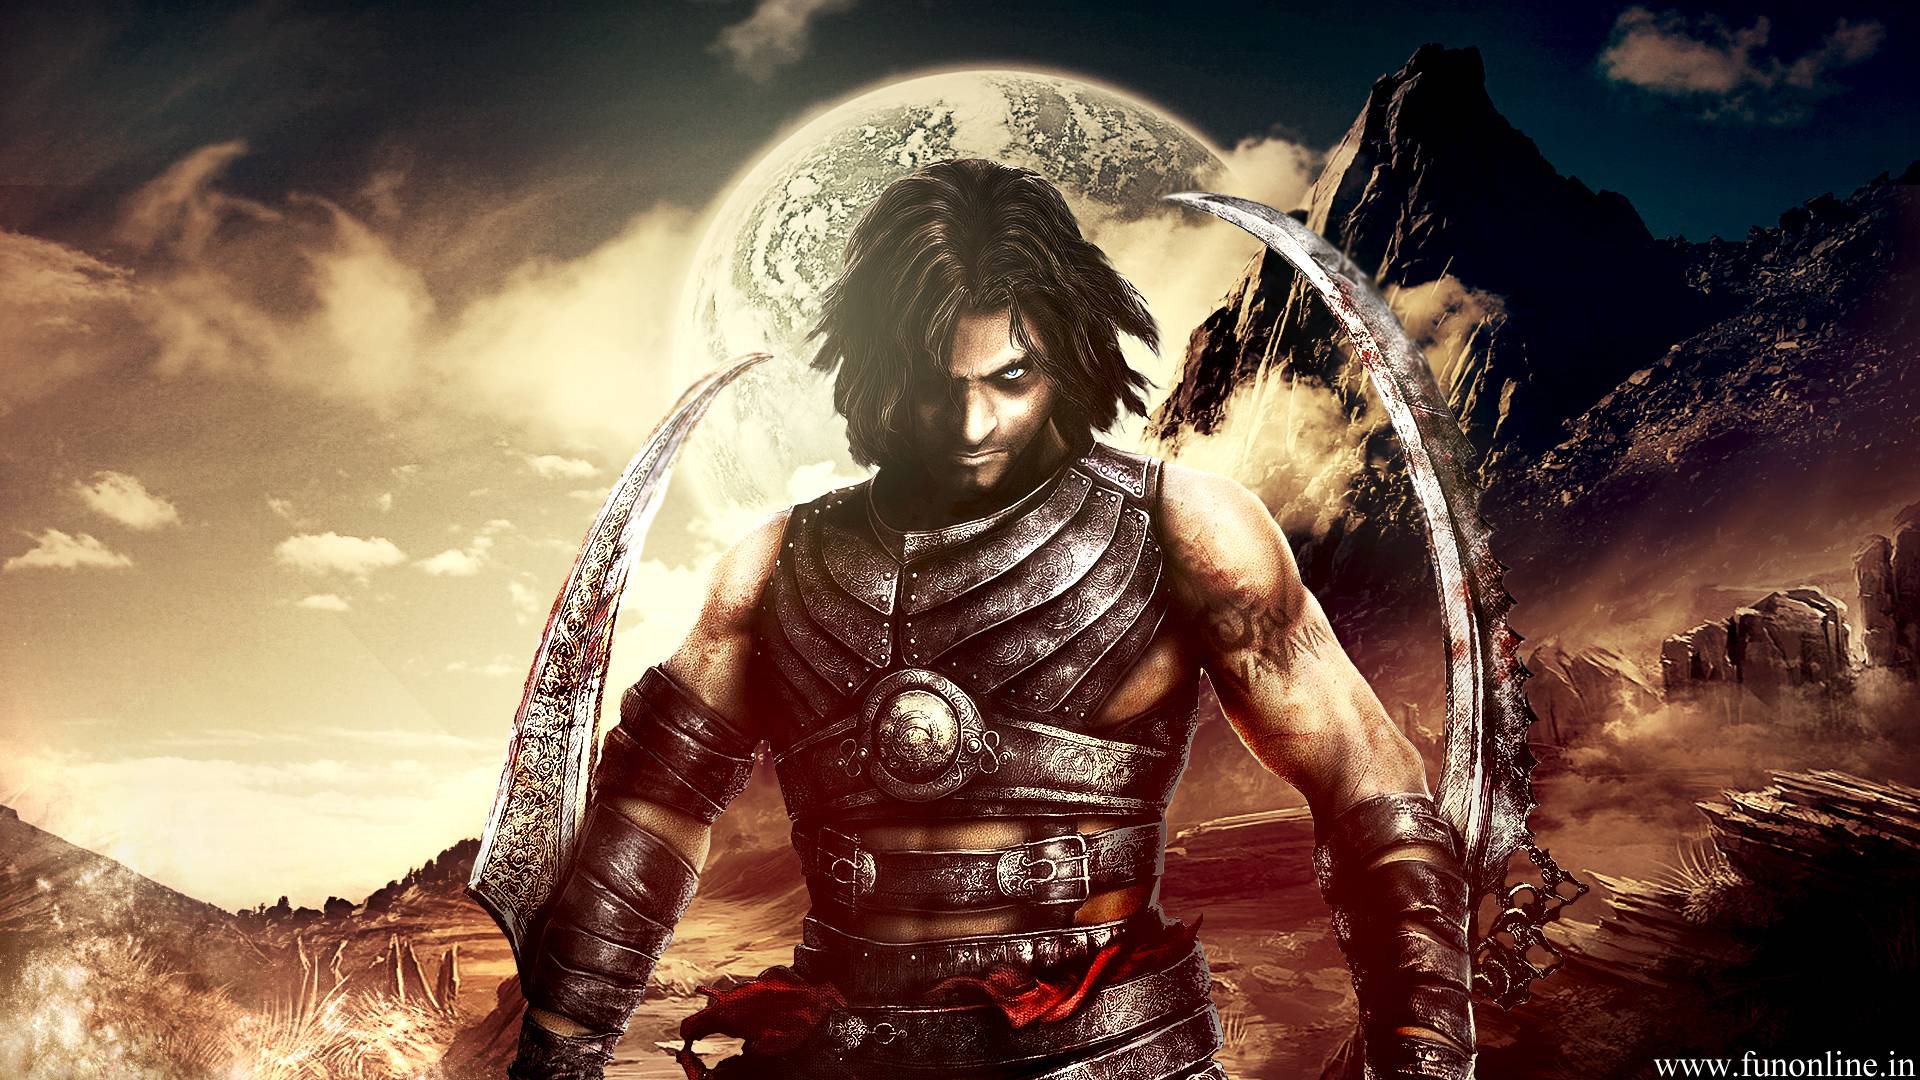 Prince of Persia Action-Adventure Game Series HD Wallpapers for Free